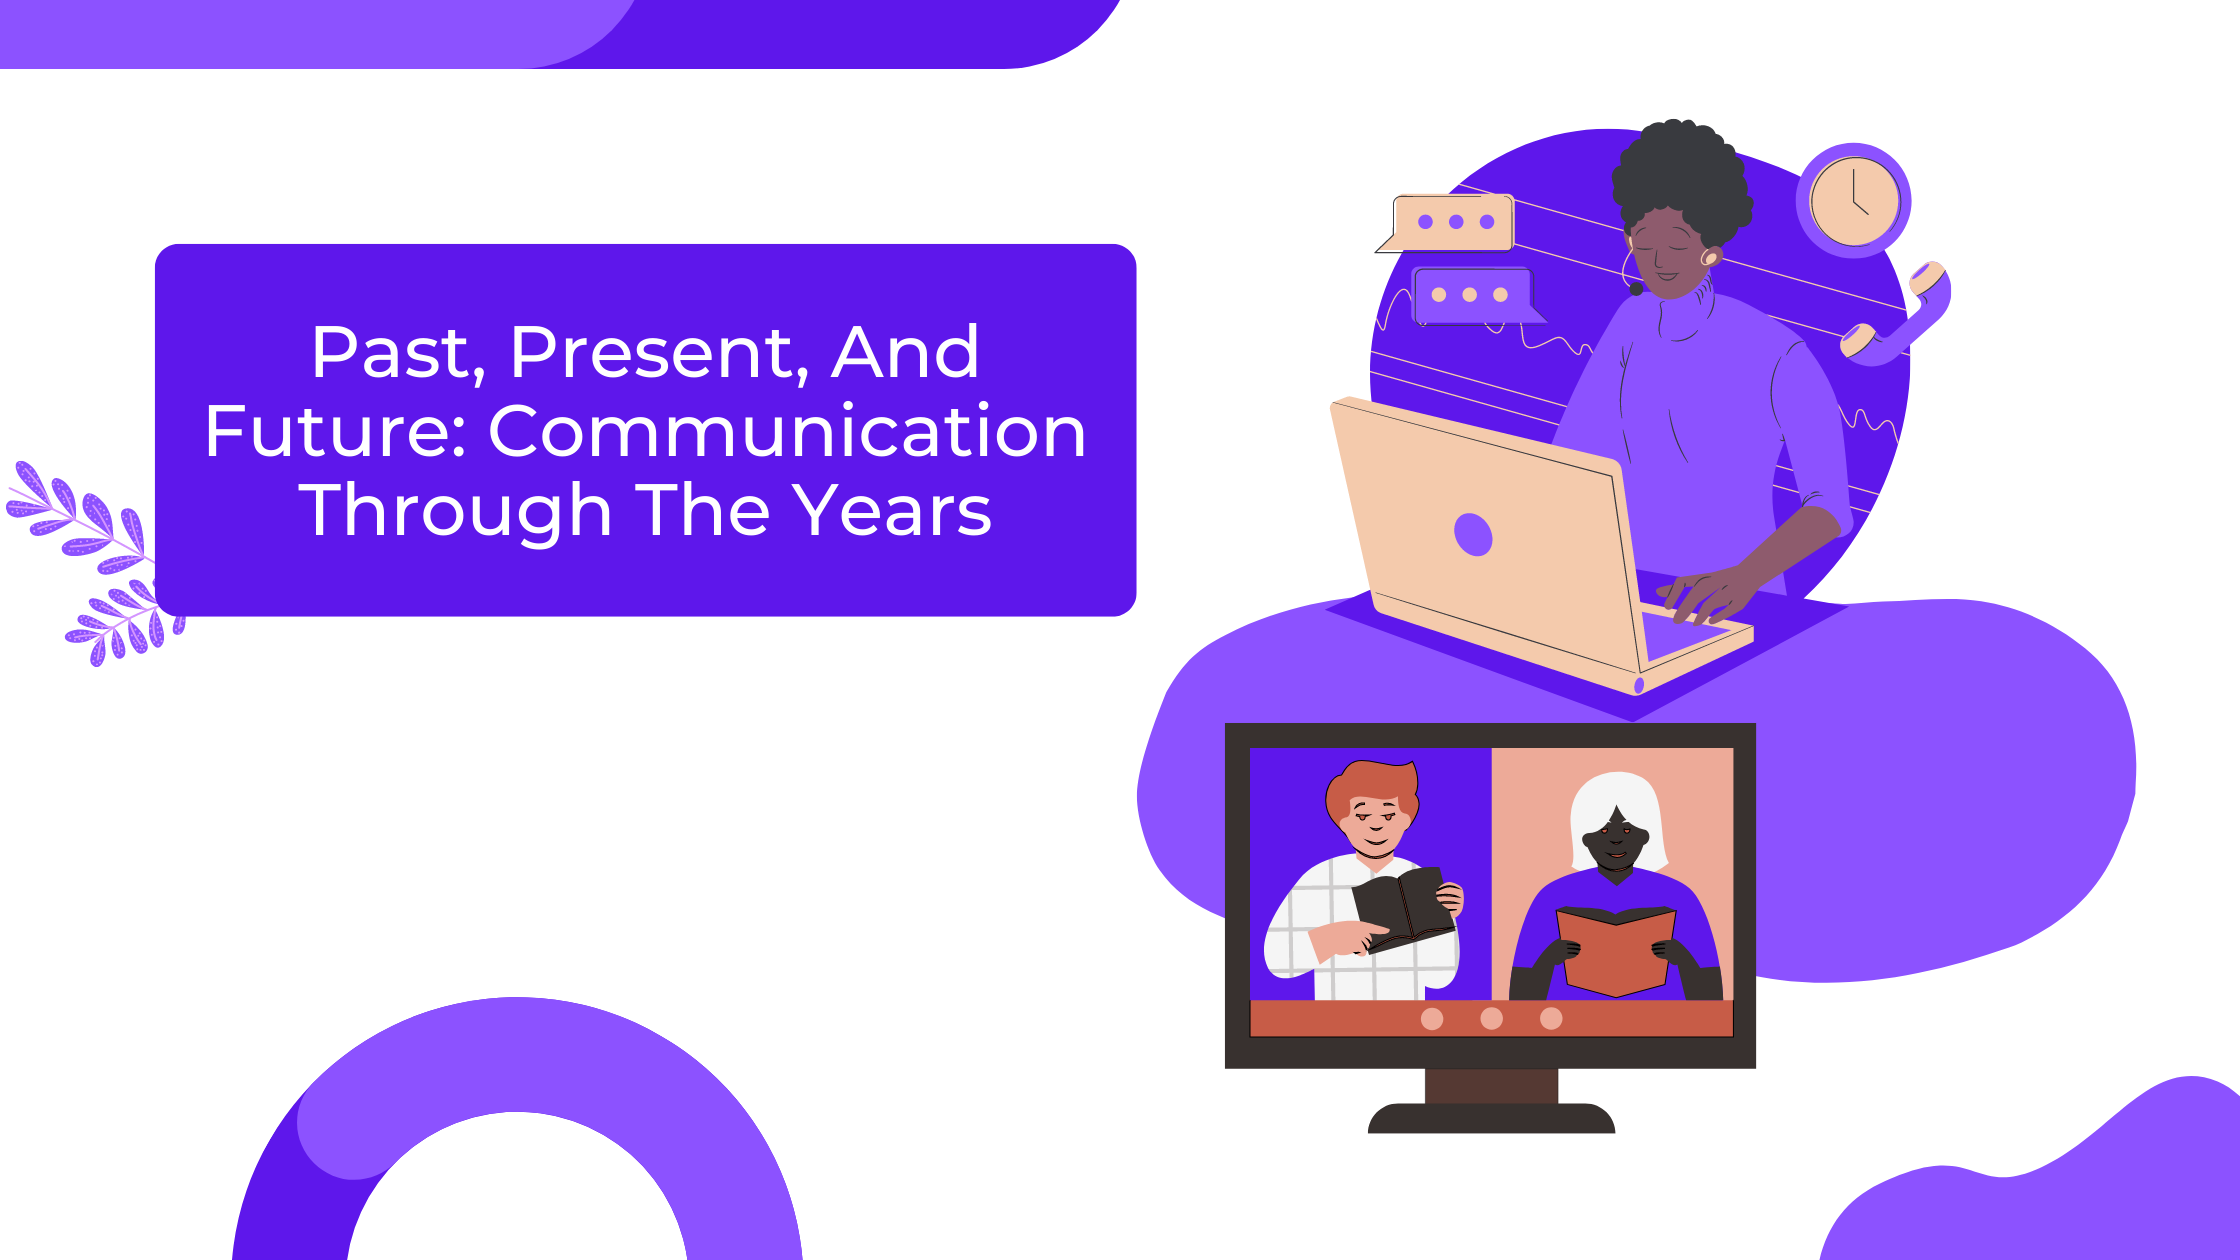 Past, Present, And Future: Communication Through The Years